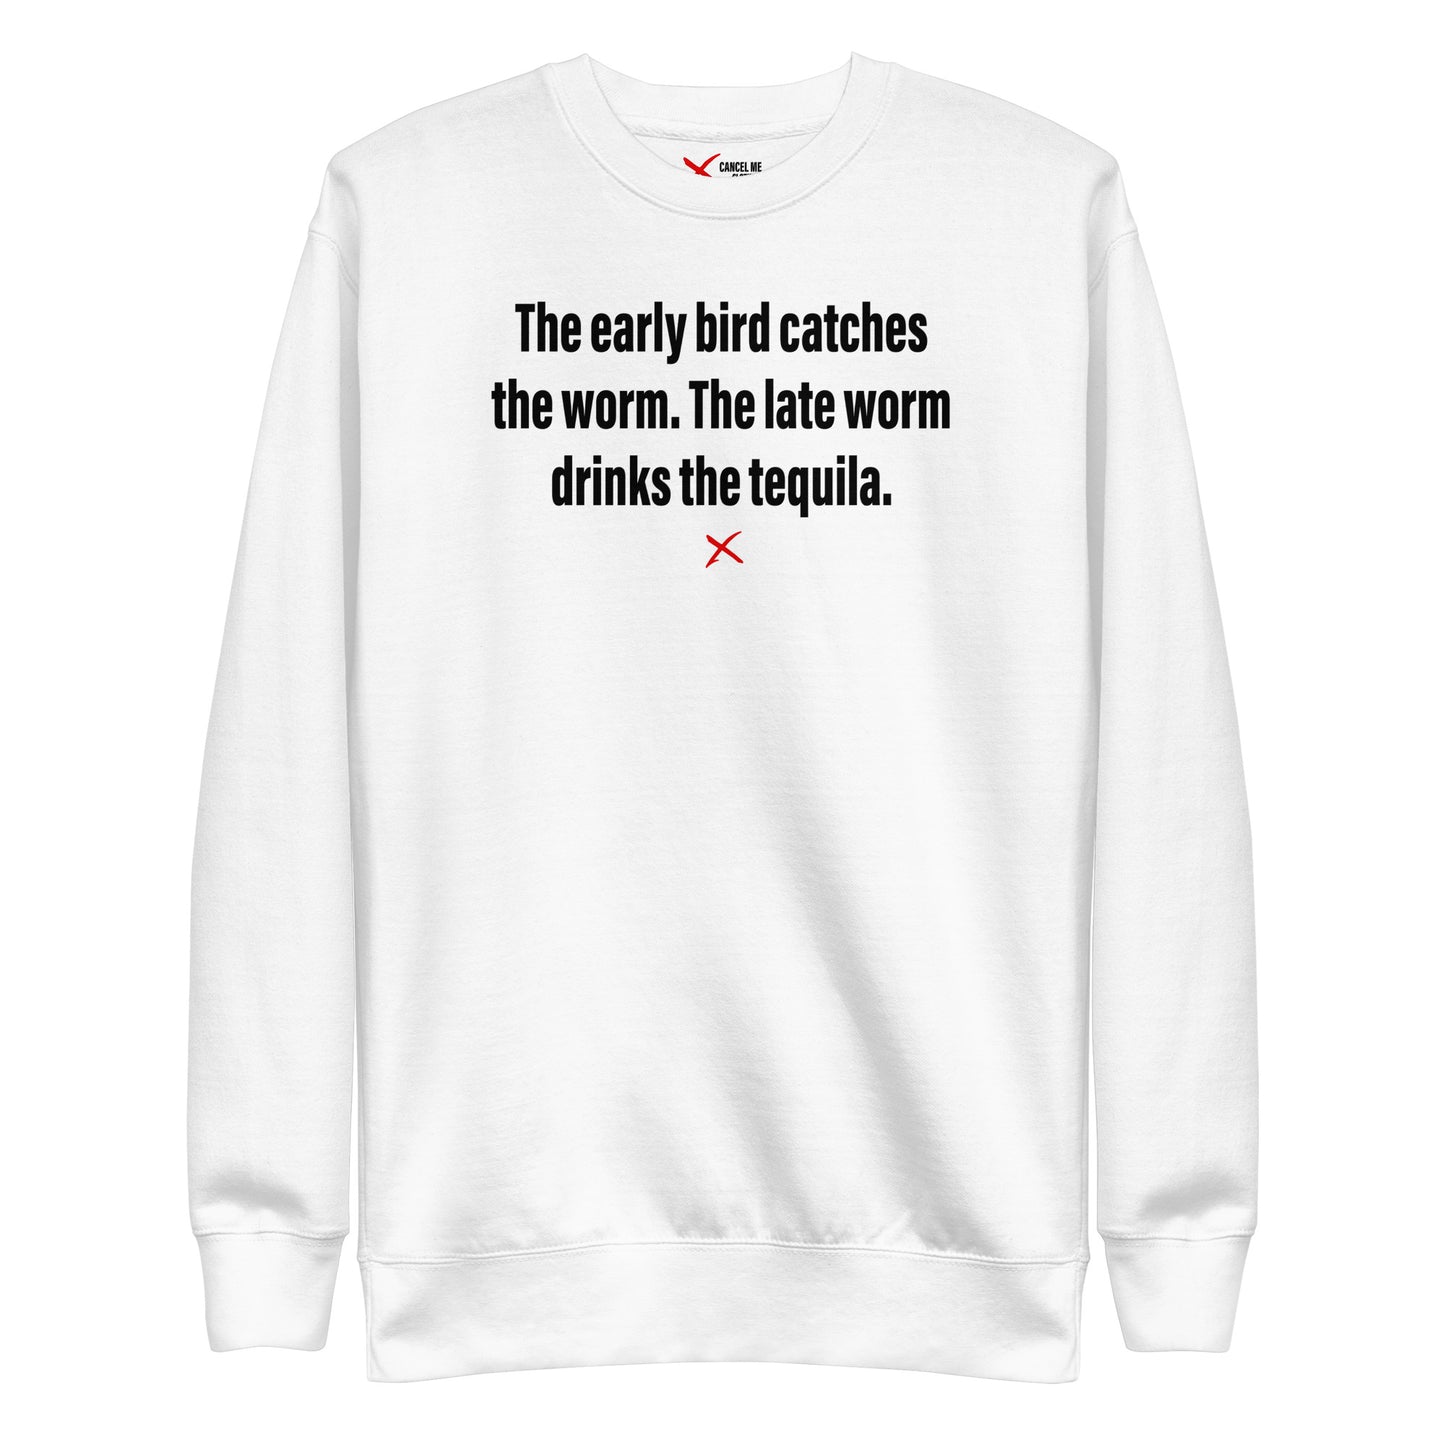 The early bird catches the worm. The late worm drinks the tequila. - Sweatshirt